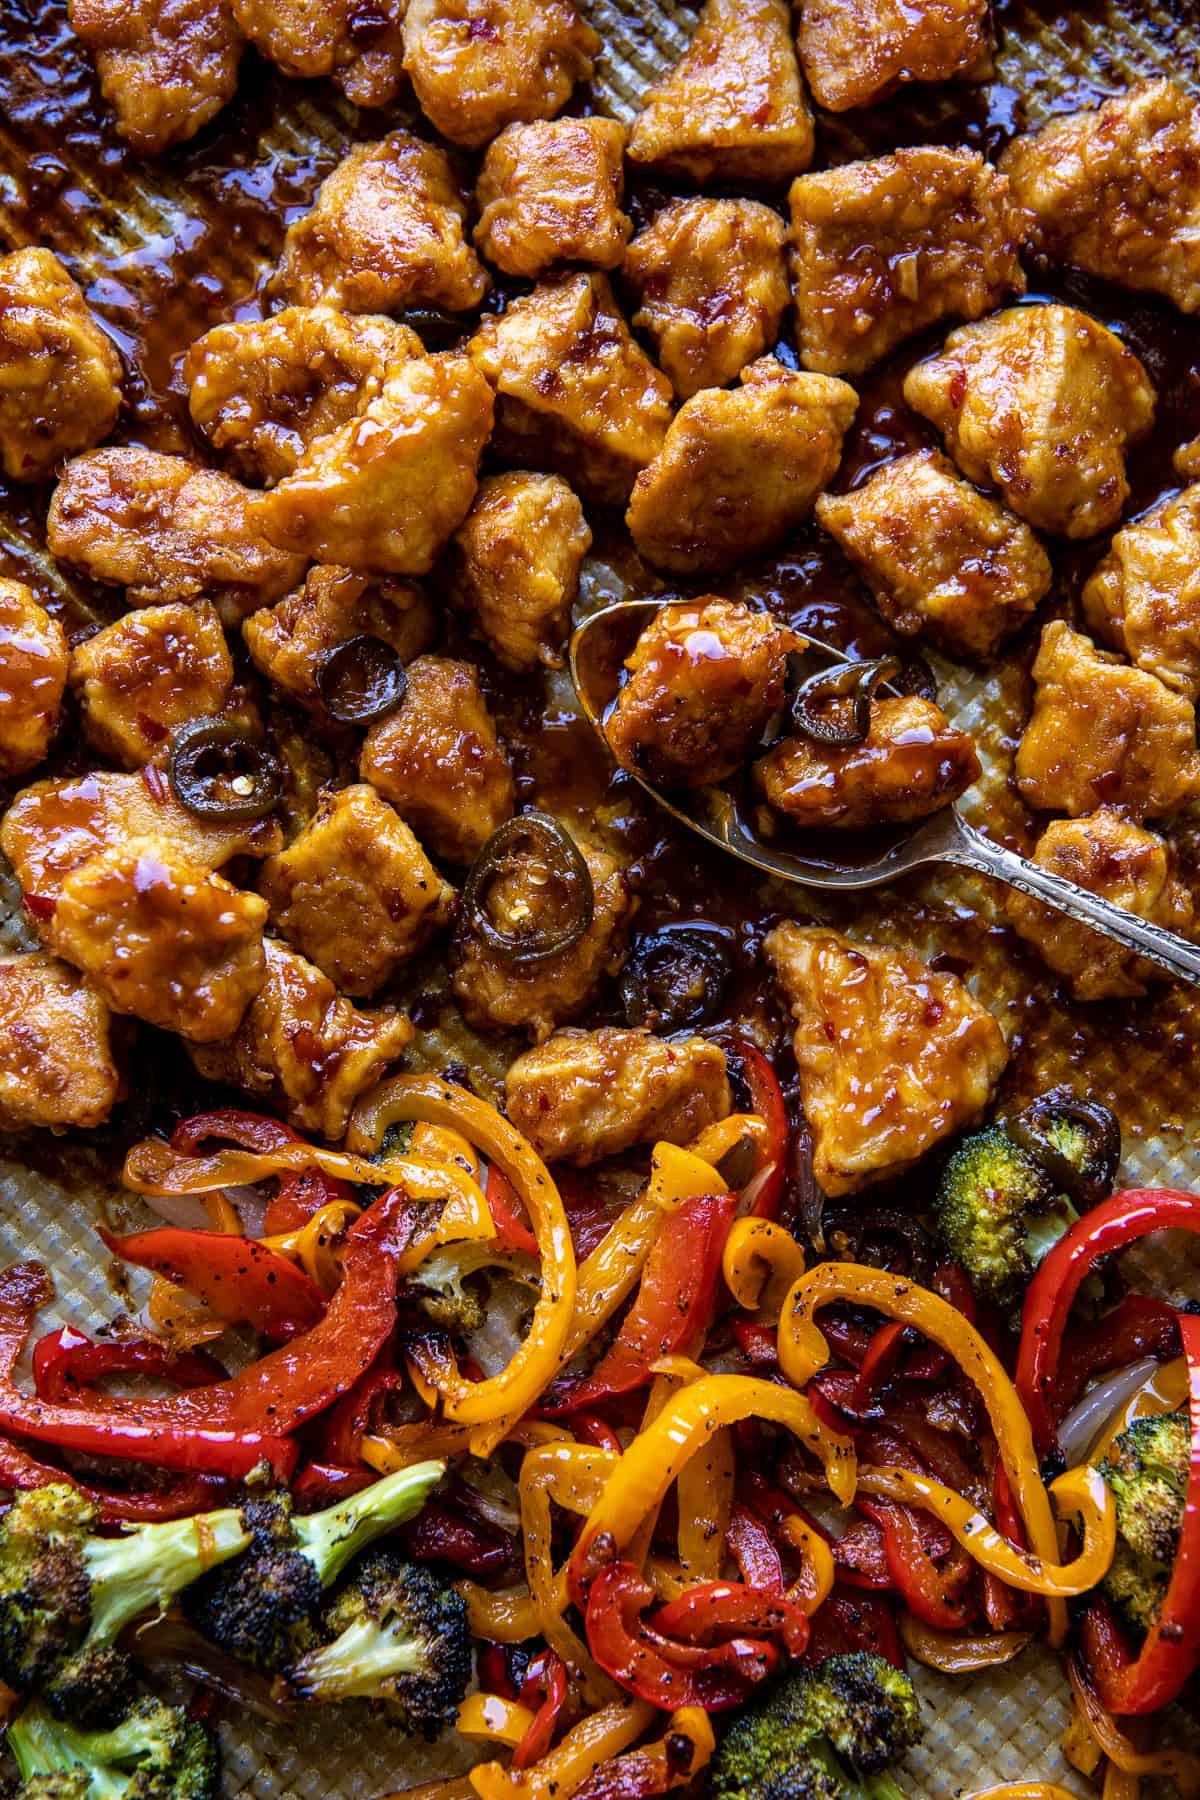 https://www.halfbakedharvest.com/sweet-and-sour-chicken/